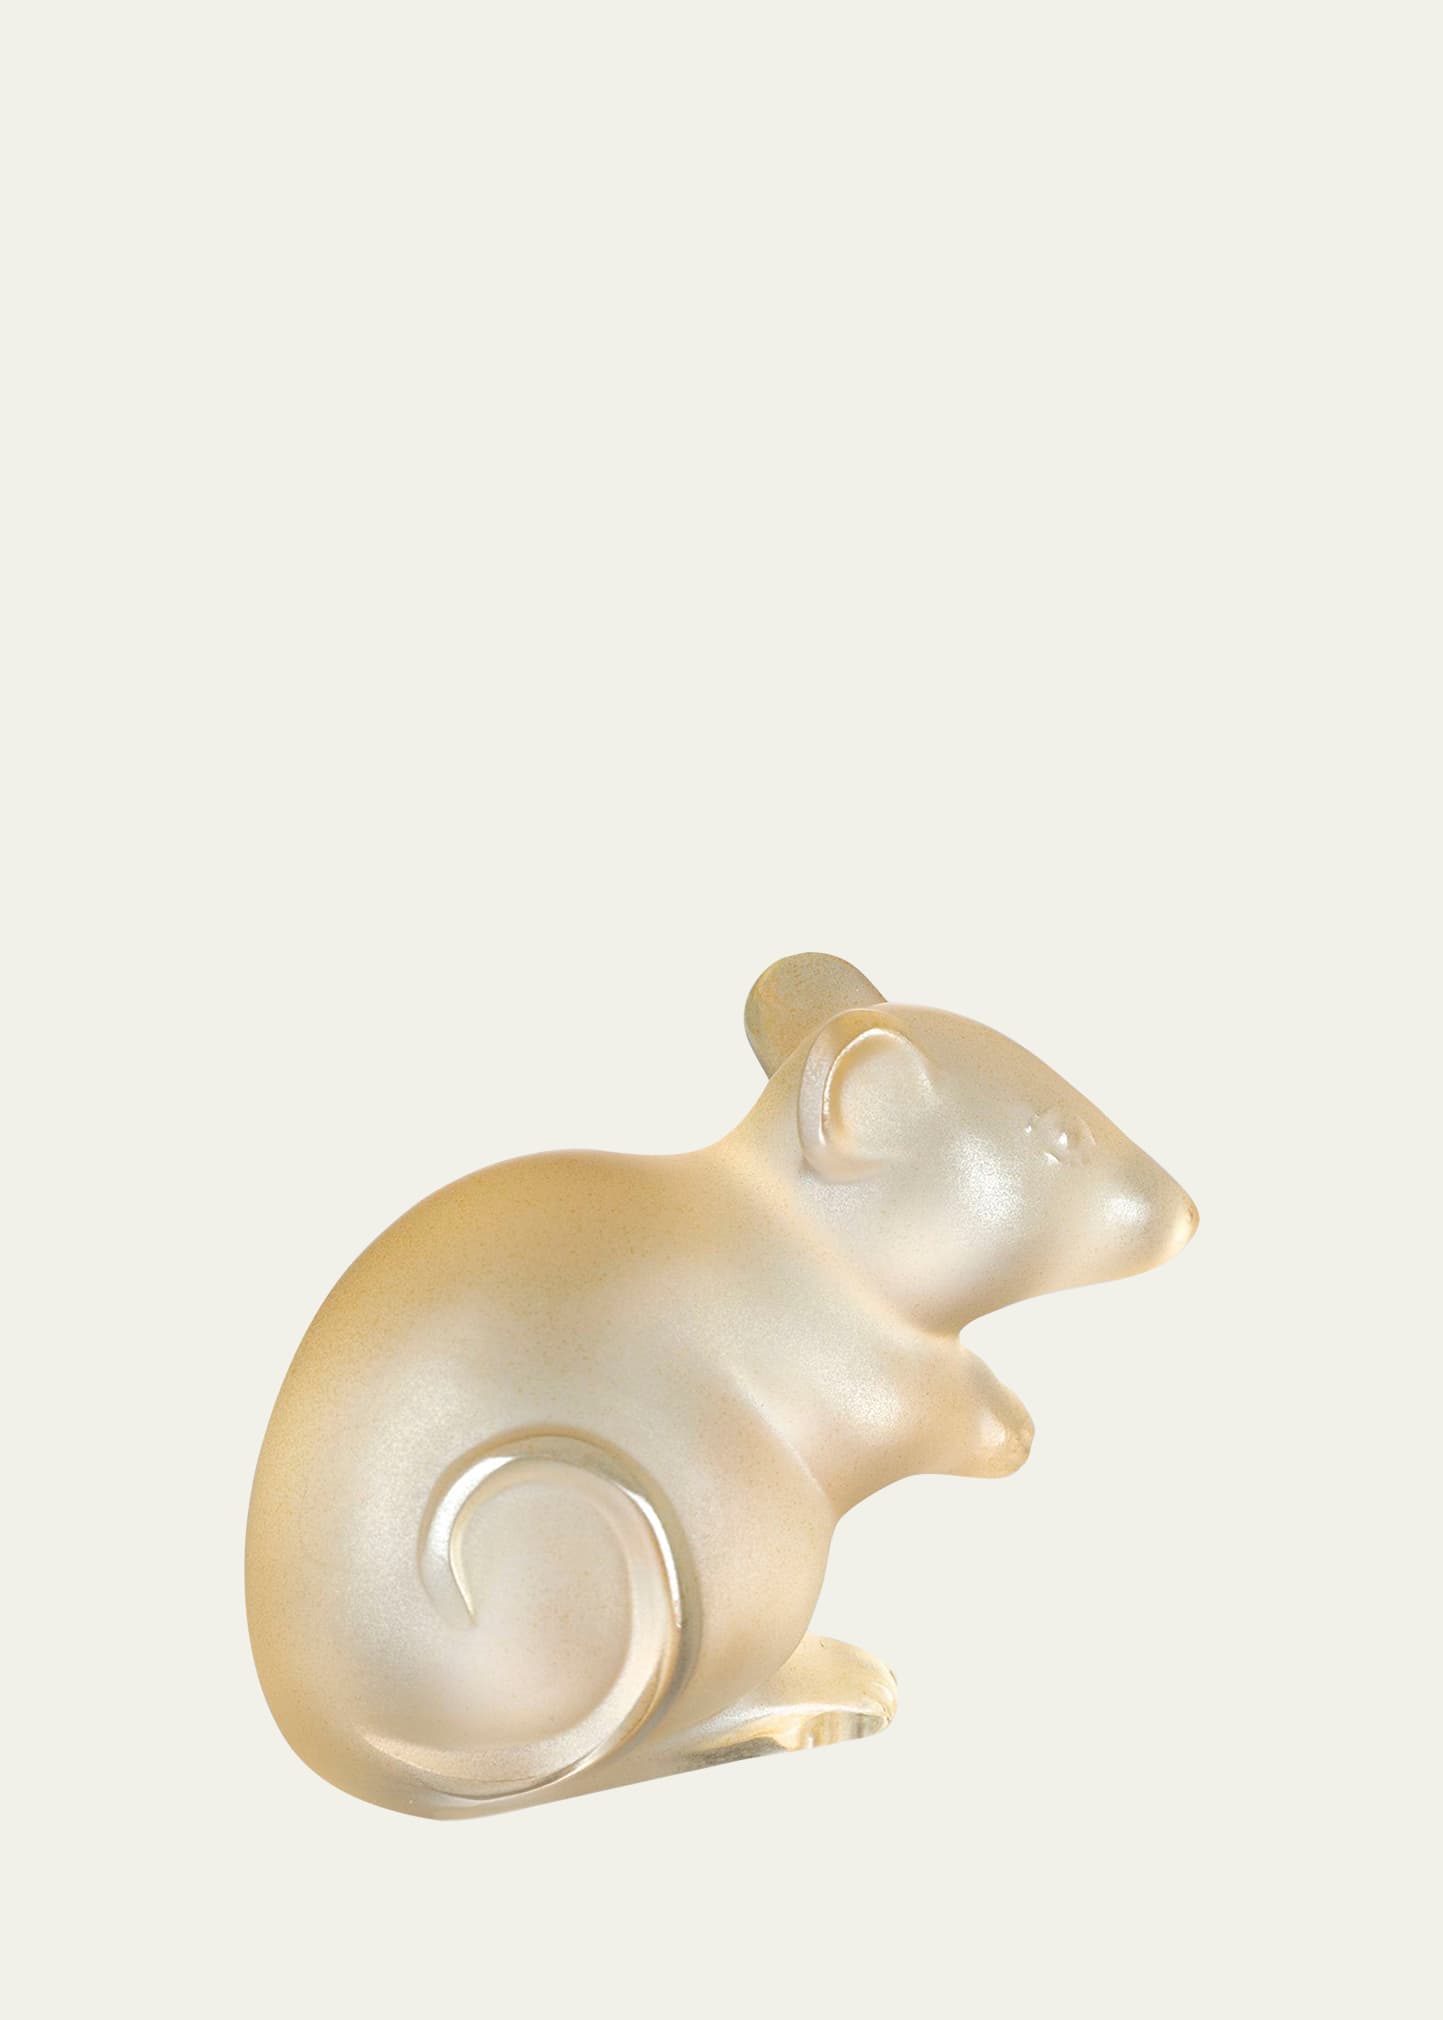 Lalique Gold Luster Mouse Figurine